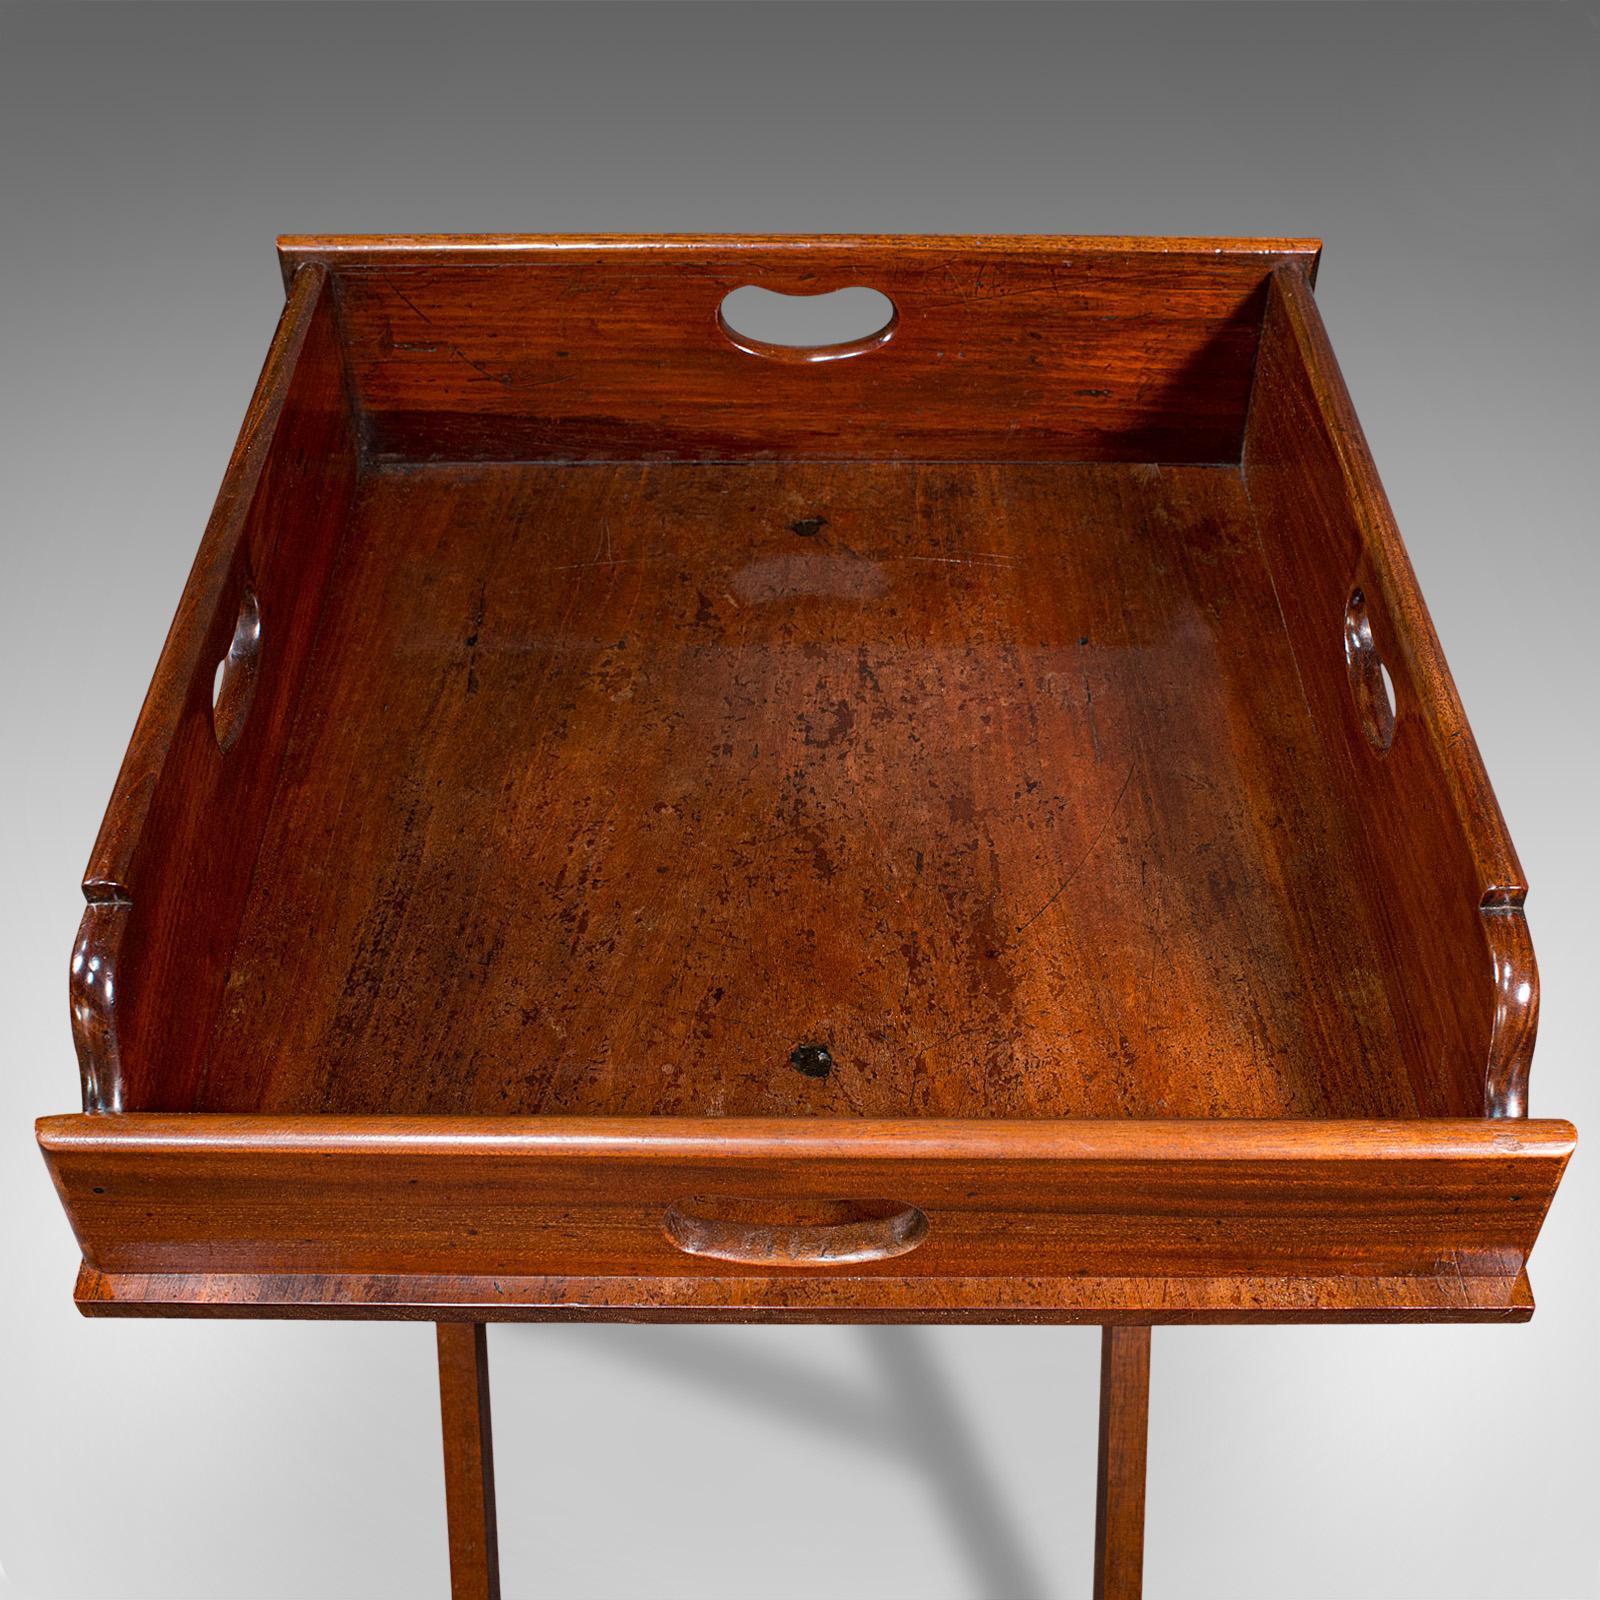 Antique Butler's Stand, English, Mahogany, Serving Tray, Rest, Victorian, C.1900 1